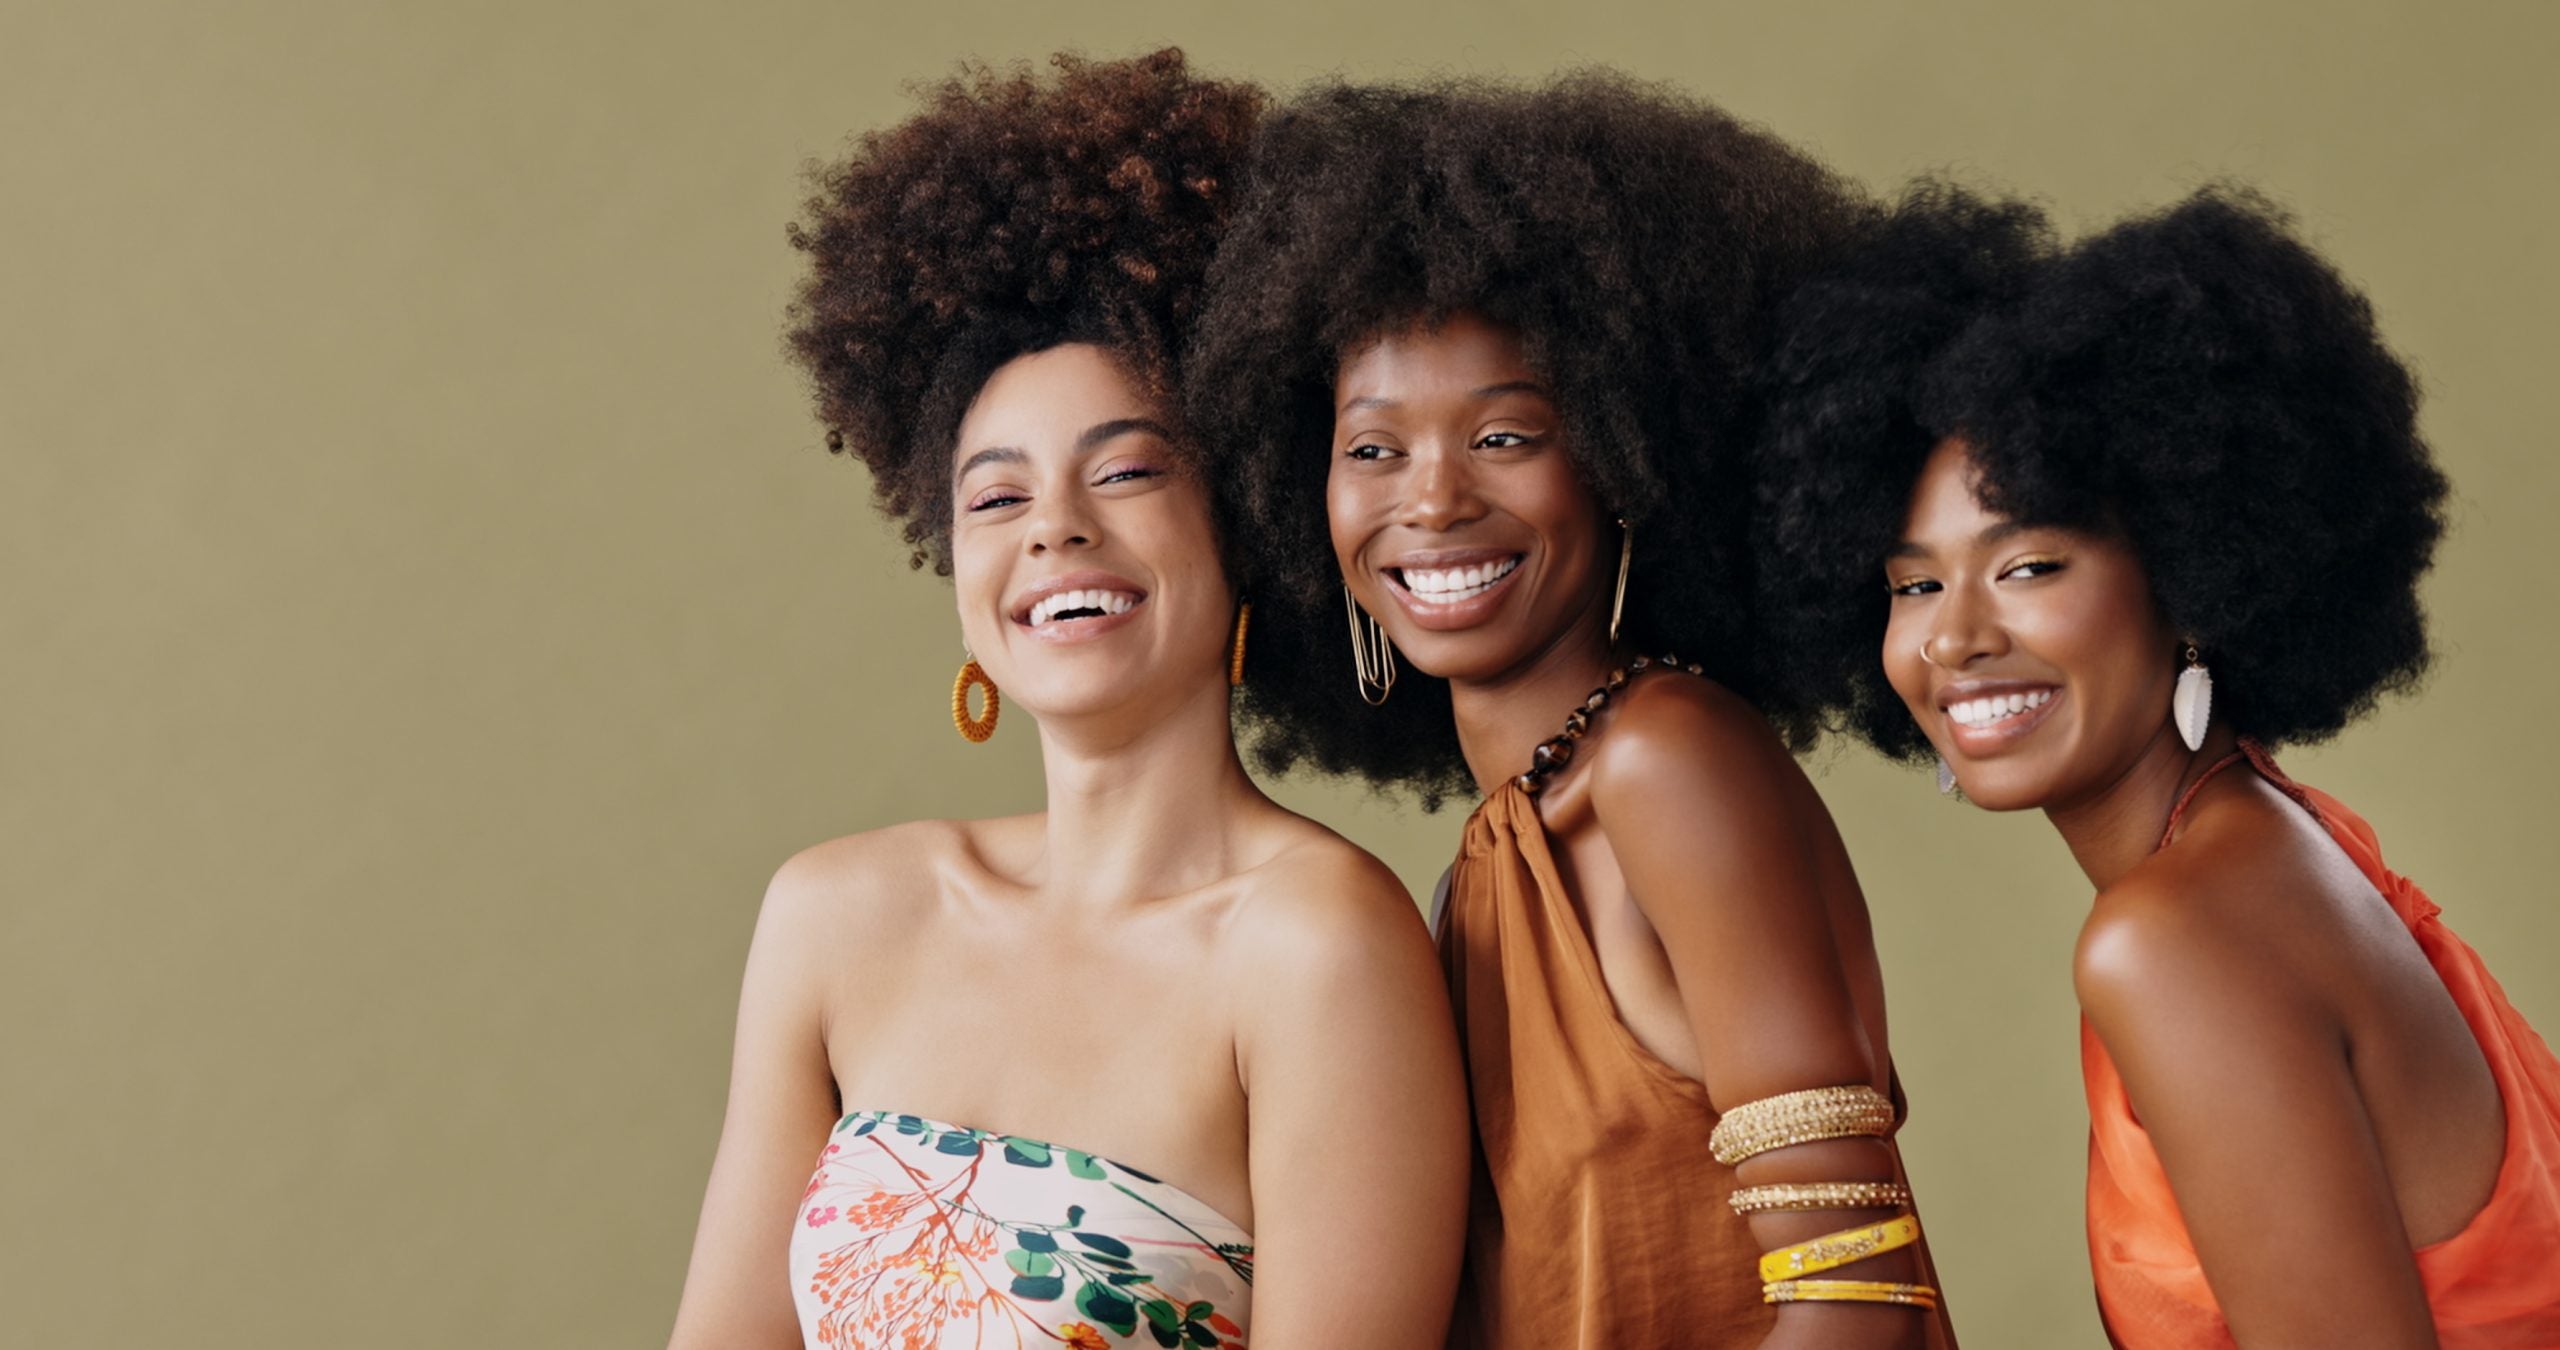 African Pride Launches Initiative To Provide Hair Products To College Students To Help Them Cut Styling Costs